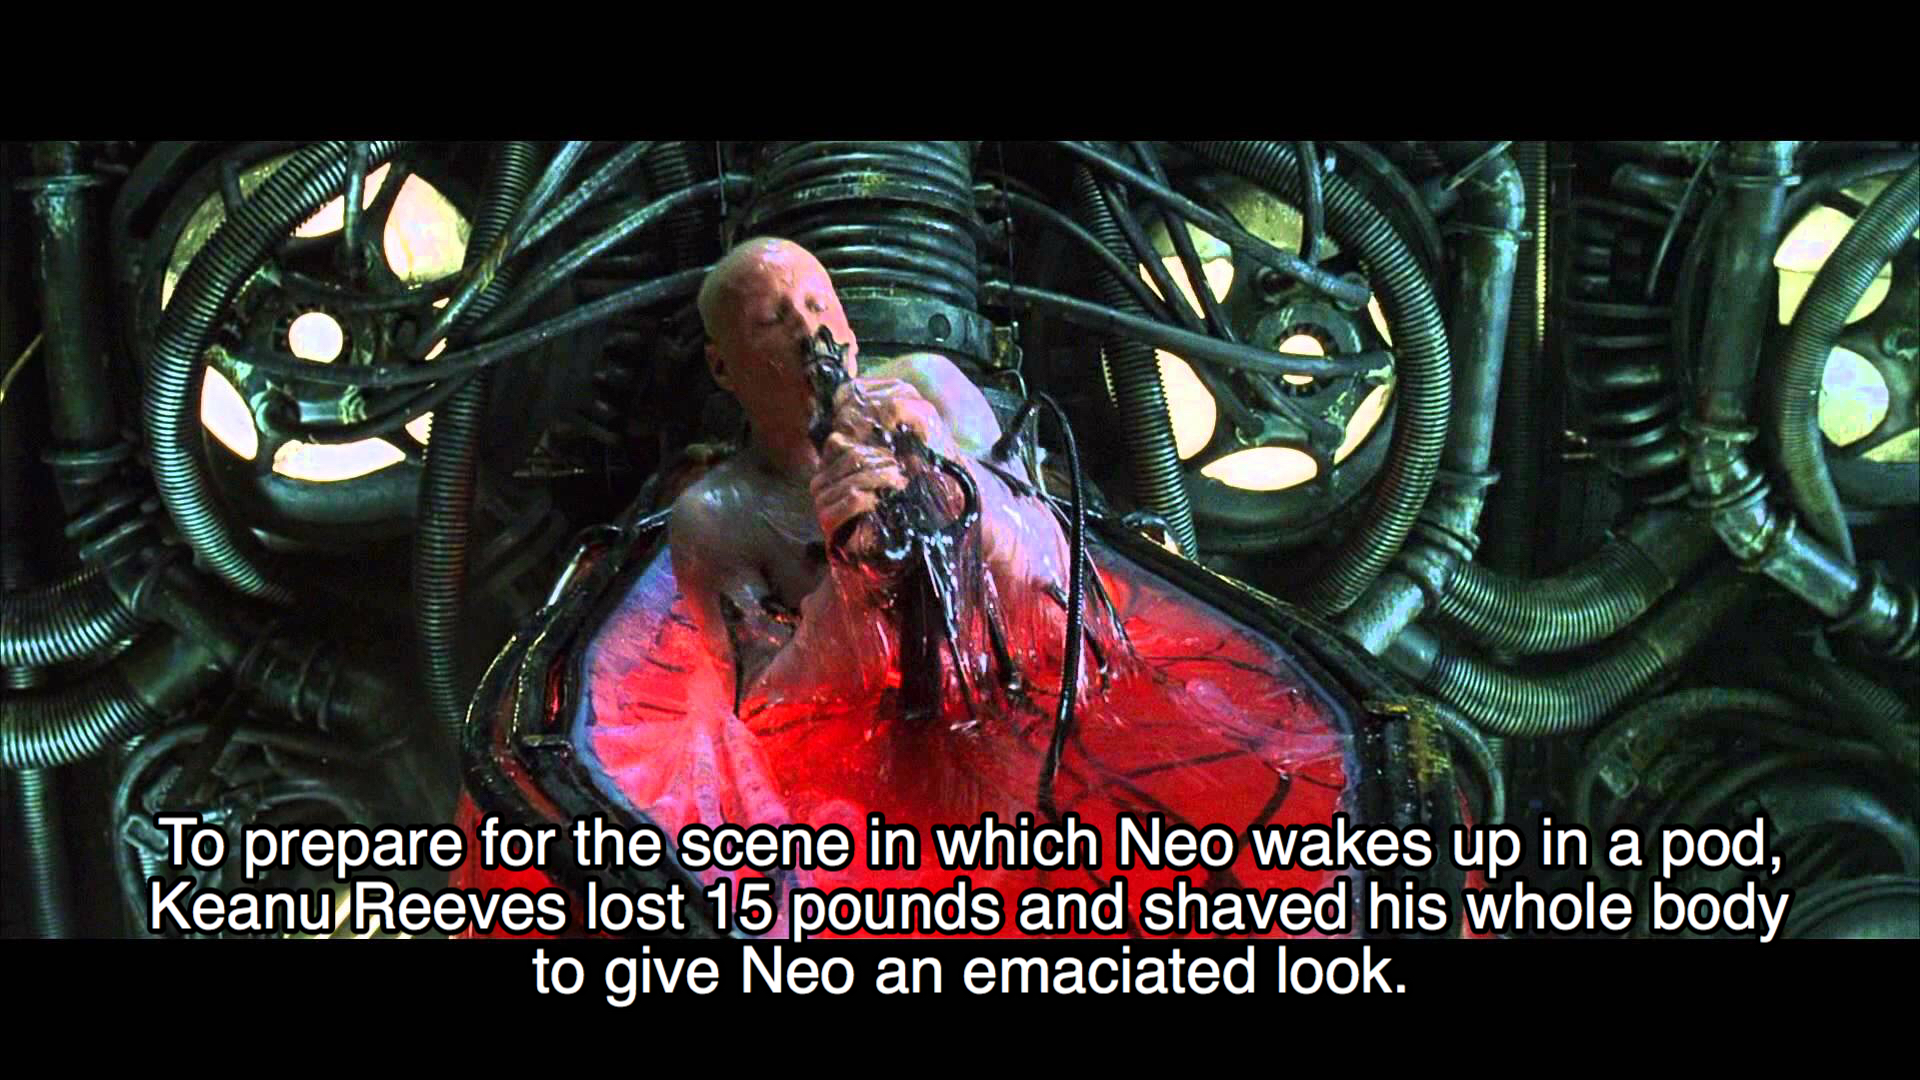 universe do we live - To prepare for the scene in which Neo wakes up in a pod, Keanu Reeves lost 15 pounds and shaved his whole body to give Neo an emaciated look.